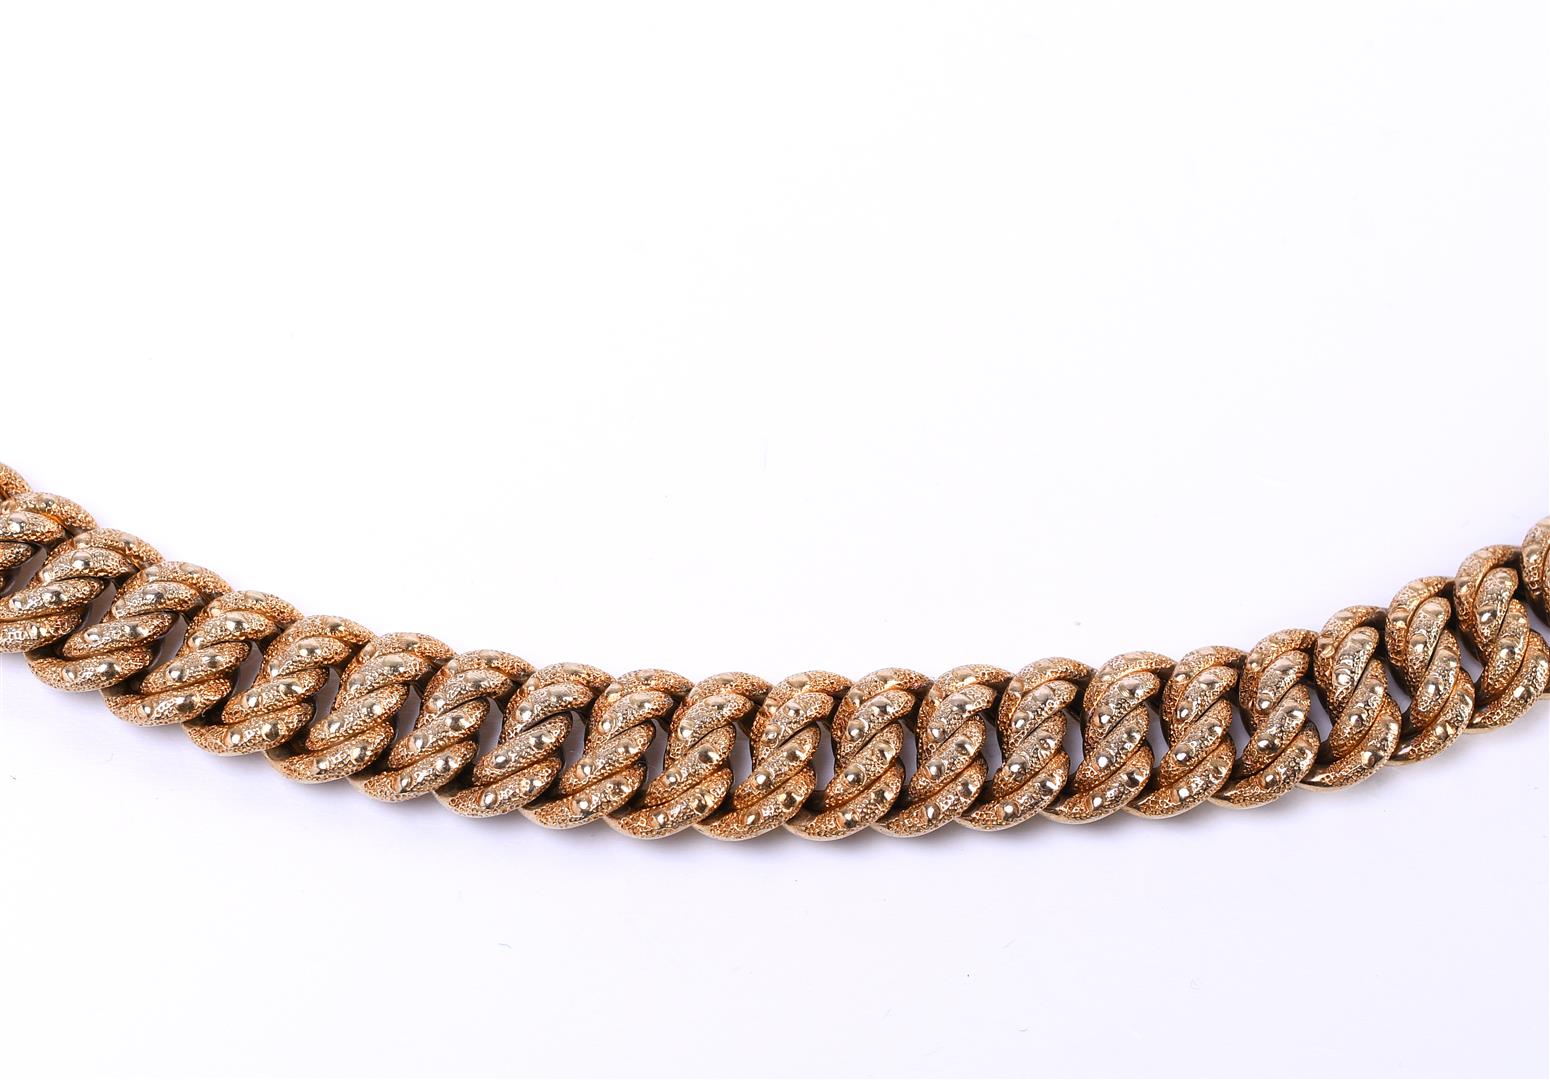 14 kt yellow gold braided gourmet necklace - Image 3 of 6